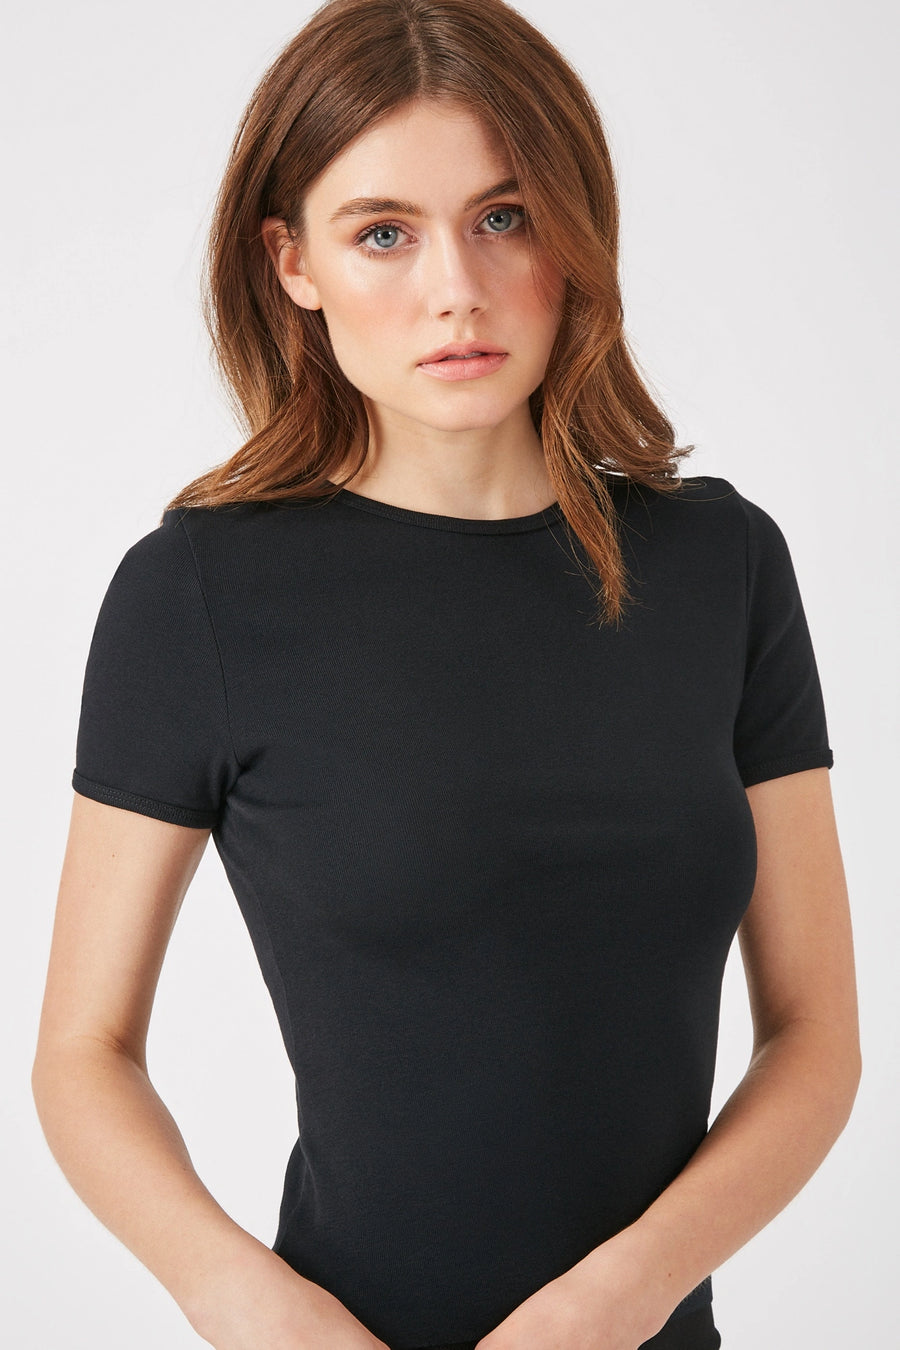 Model wearing a black cap sleeve tee The Baillie by Greyven